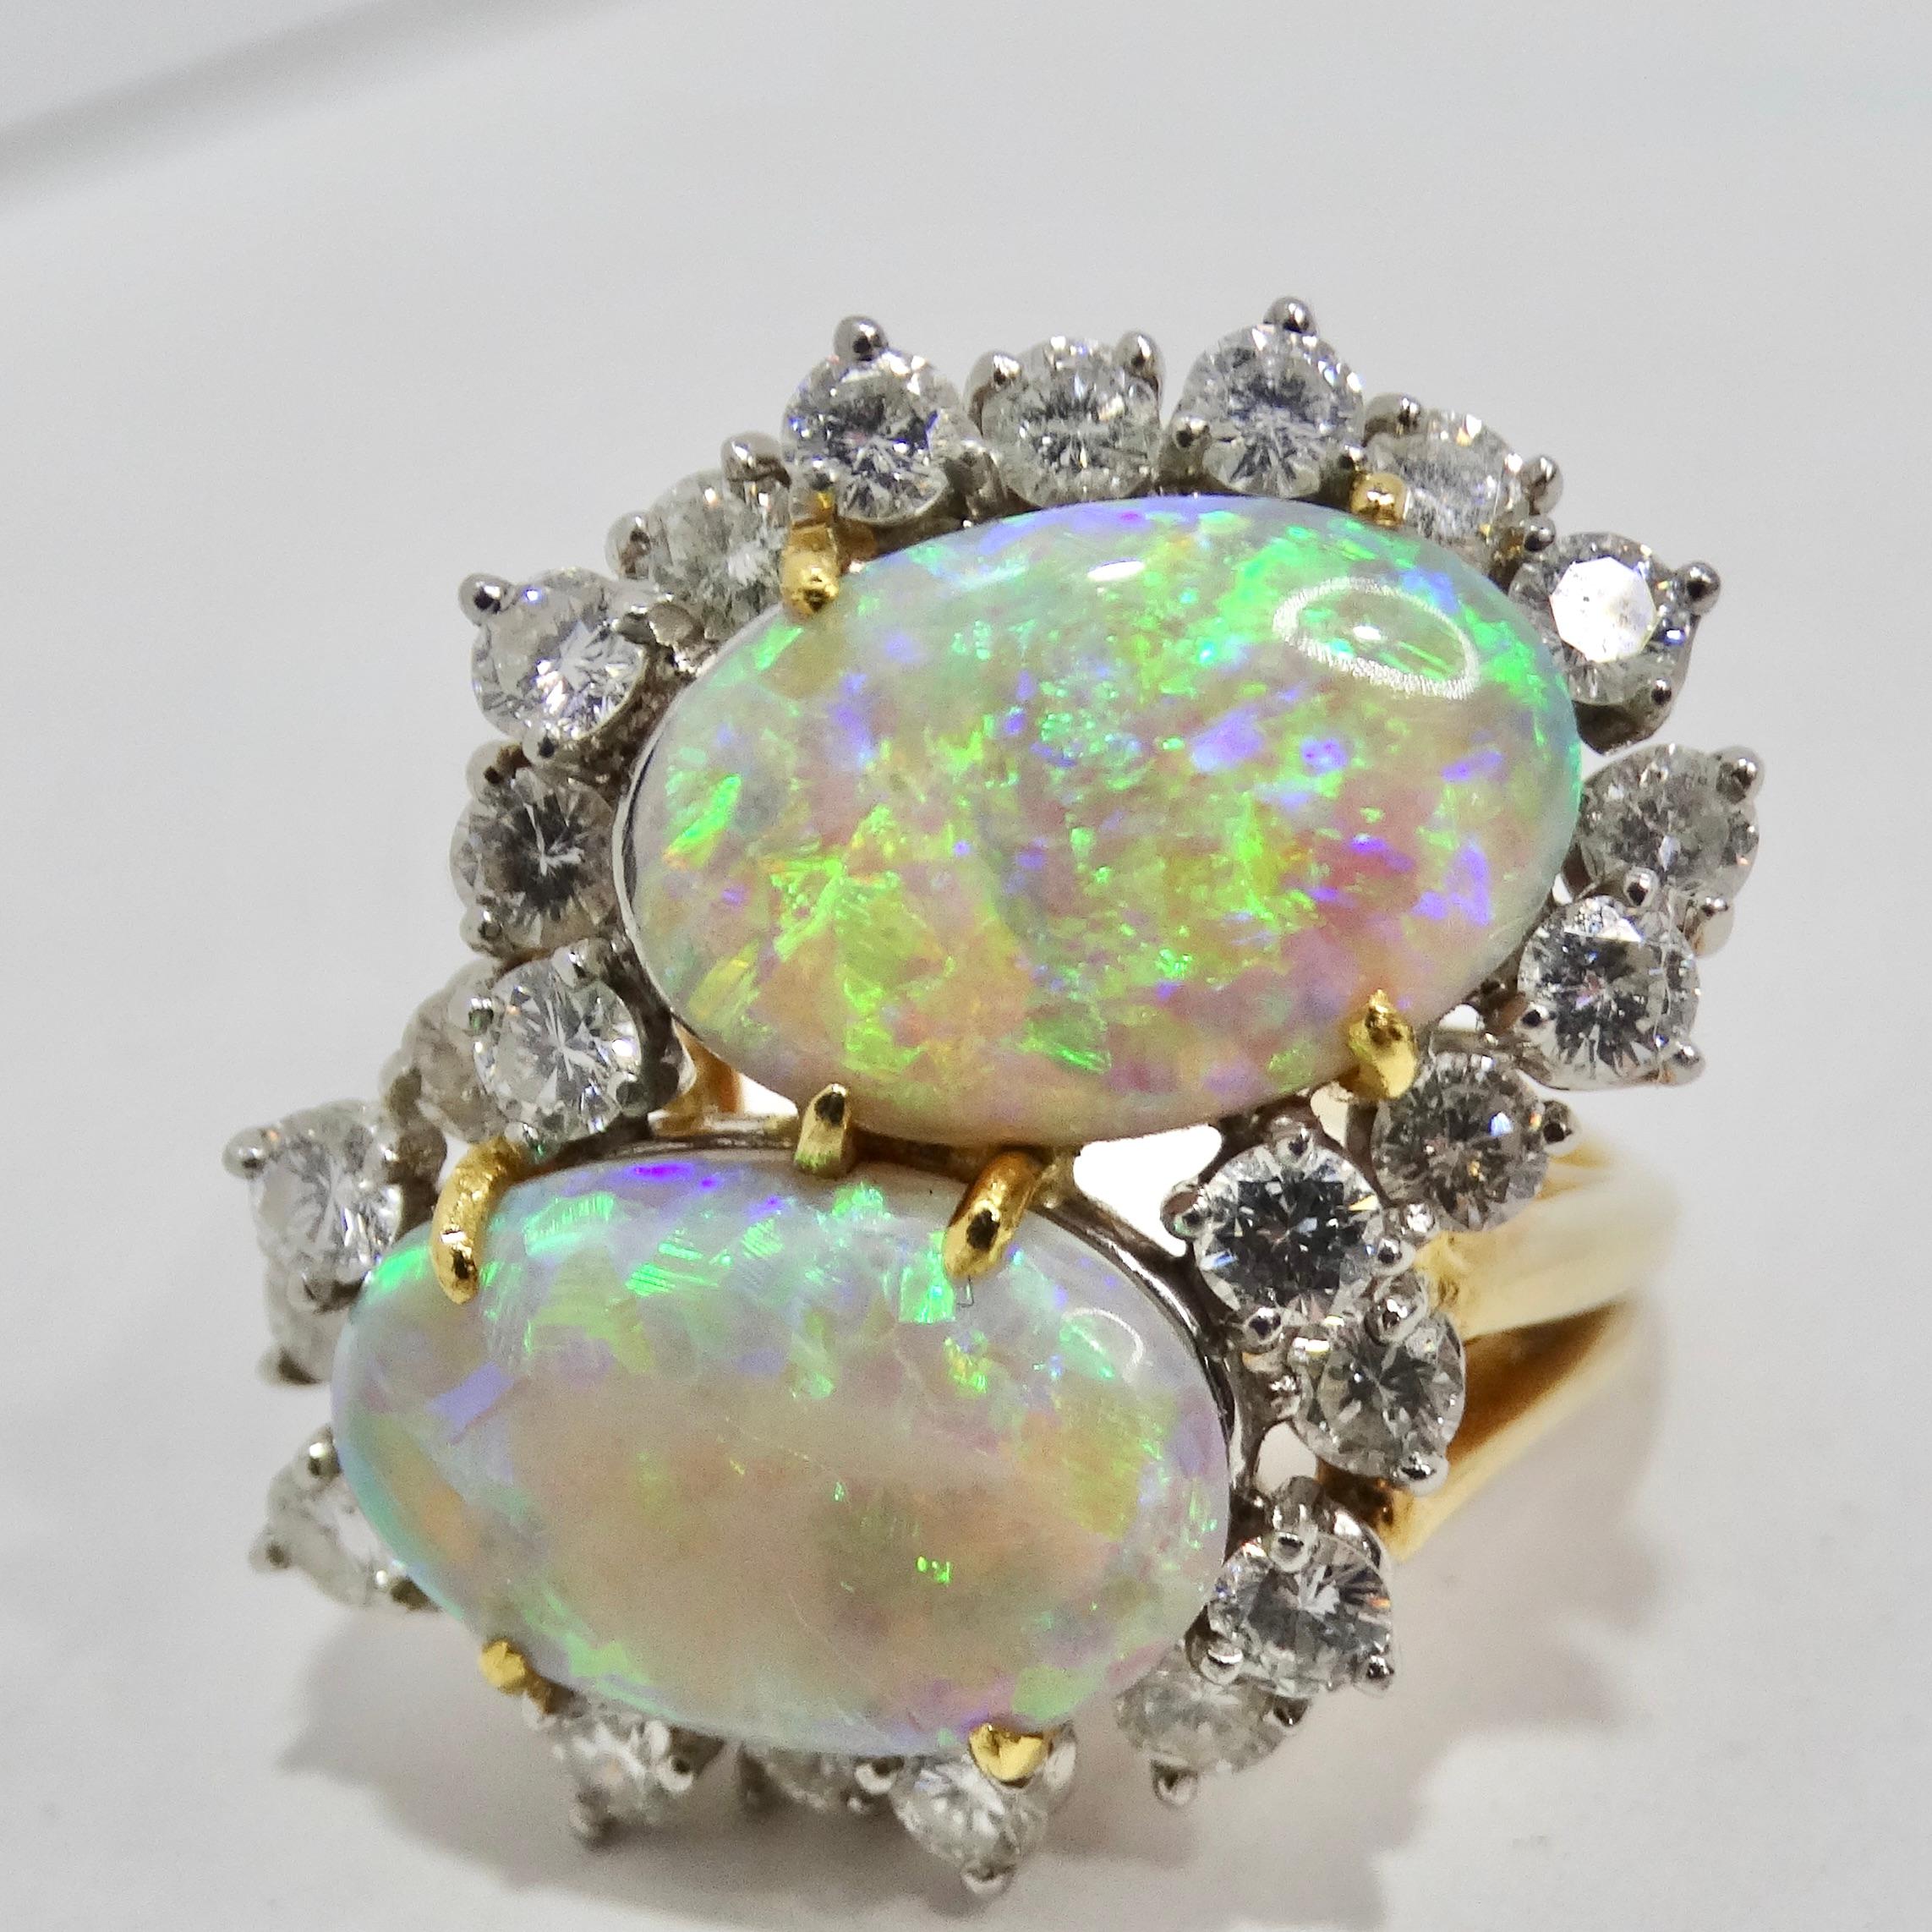 Australian Opal Sparkling Cocktail Diamond 18K Gold Ring In Excellent Condition For Sale In Scottsdale, AZ